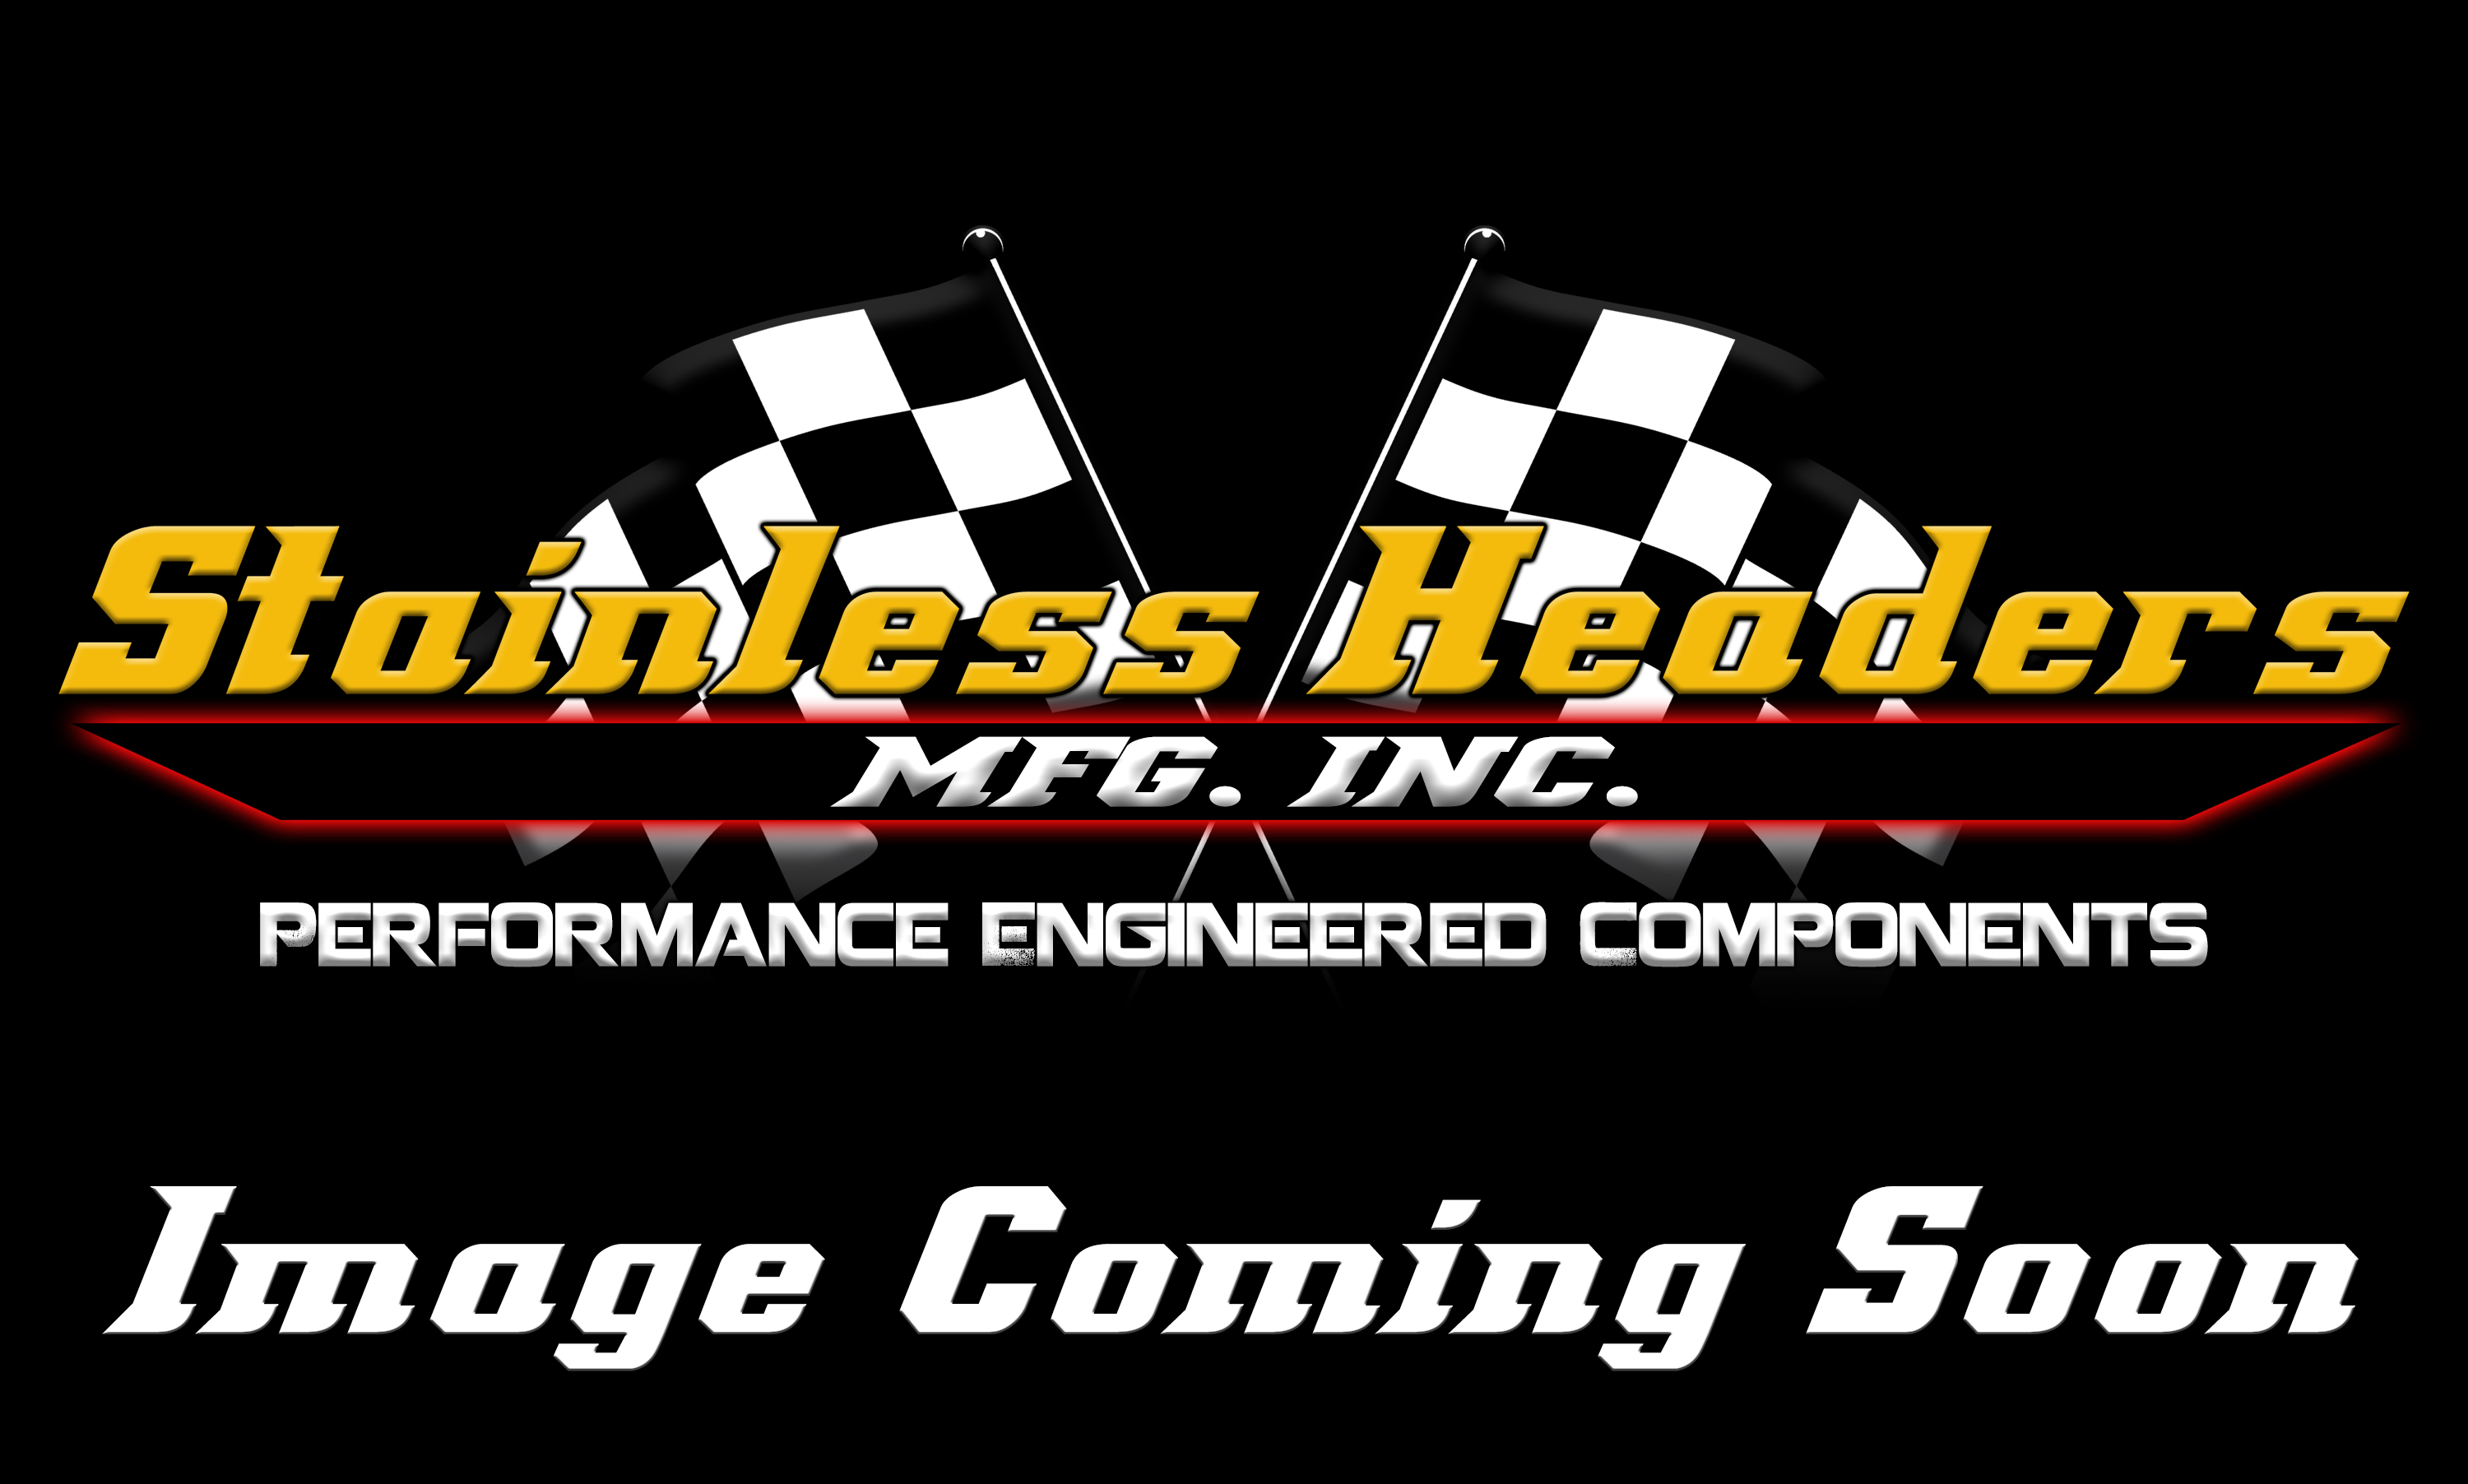 Stainless Headers - 1 5/8" Primary 2 into 1 Performance Merge Collector-16ga 321ss